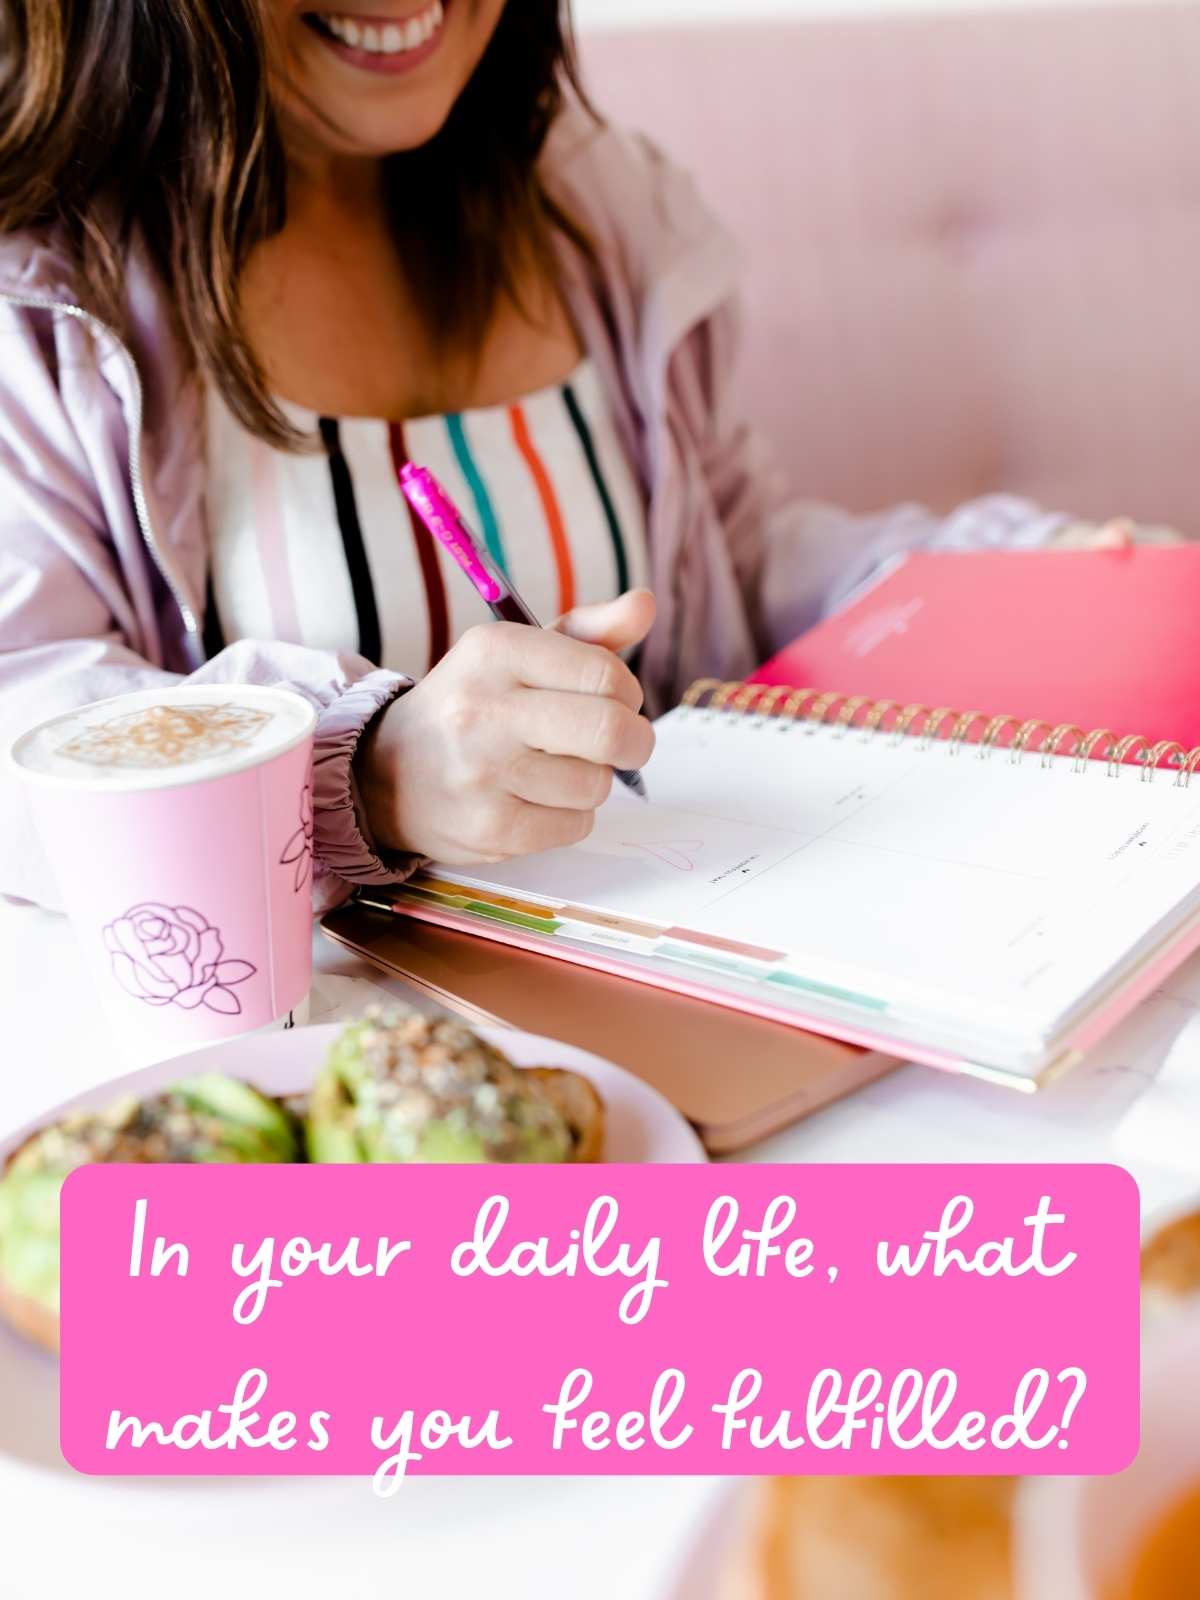 In your daily life, what makes you feel fulfilled?